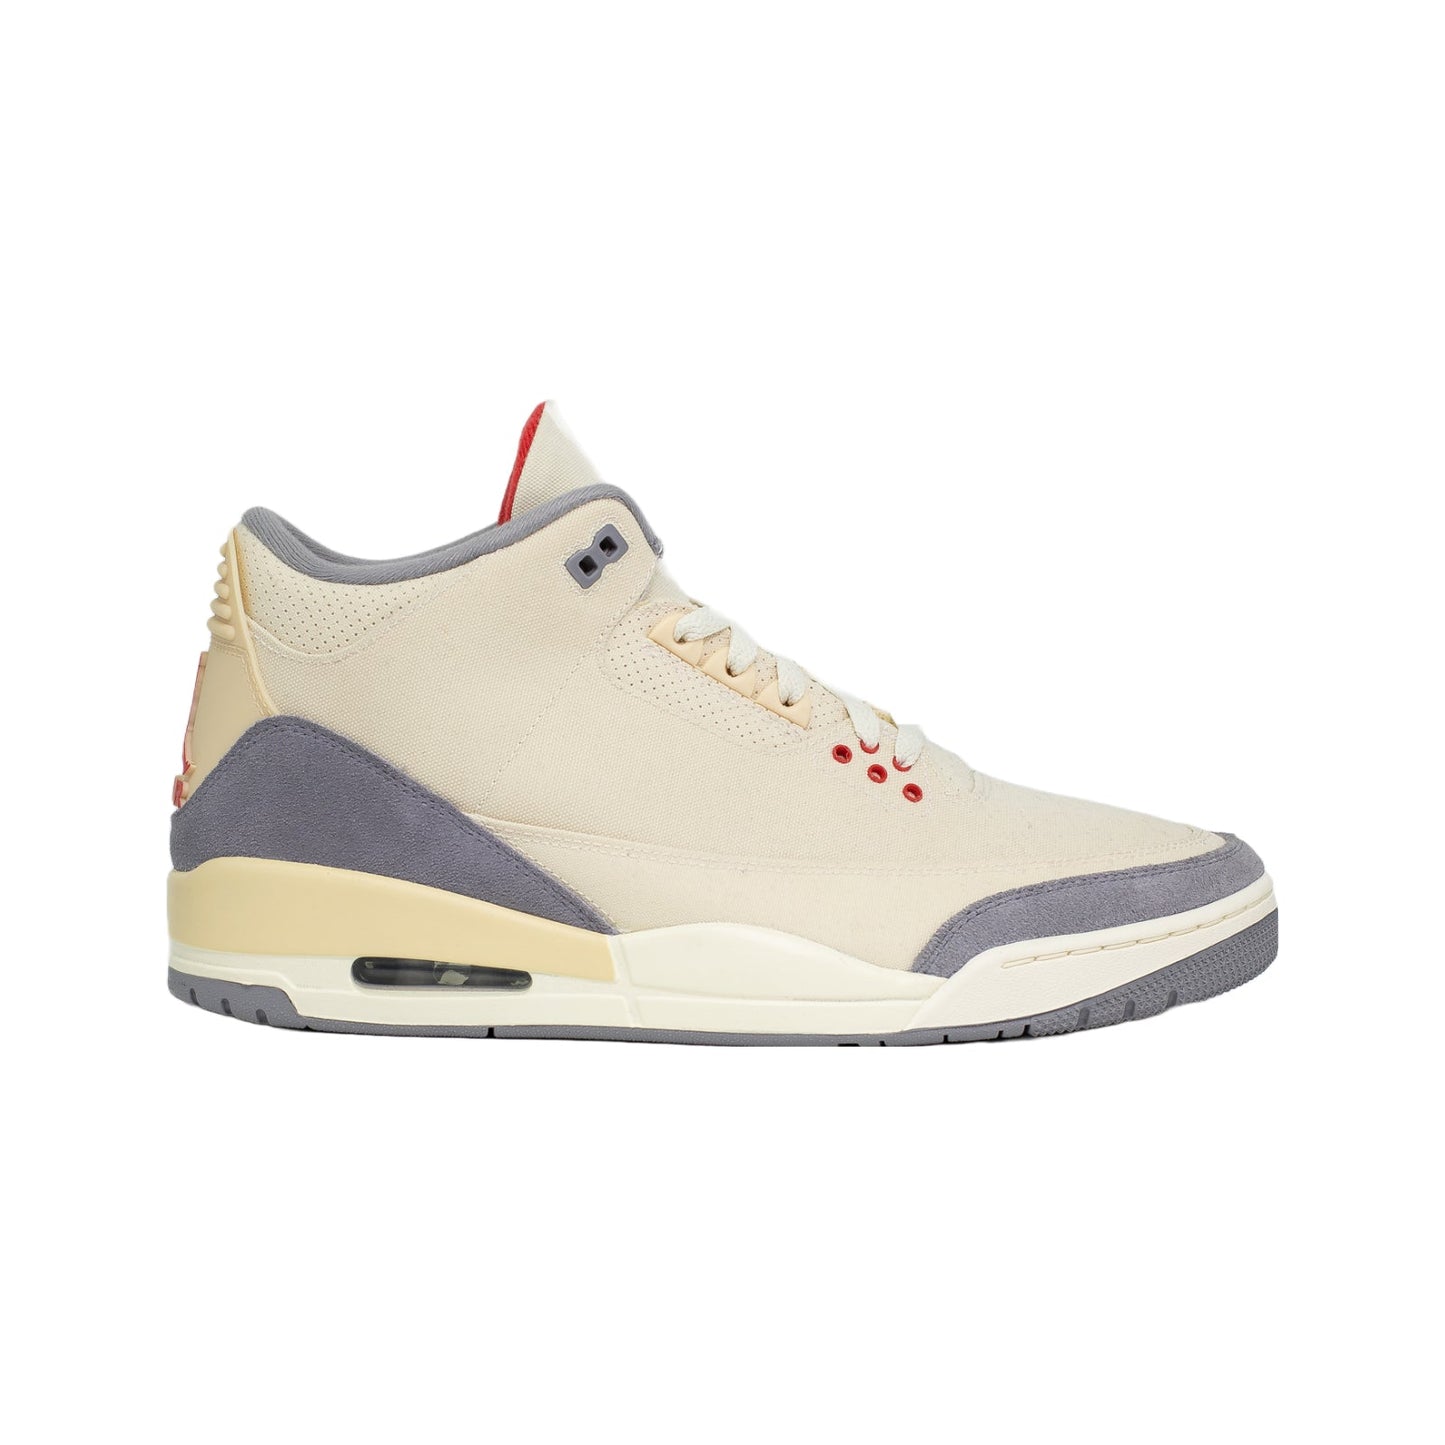 Jordan Brands womens lineup continues to grow and we have another pair of the